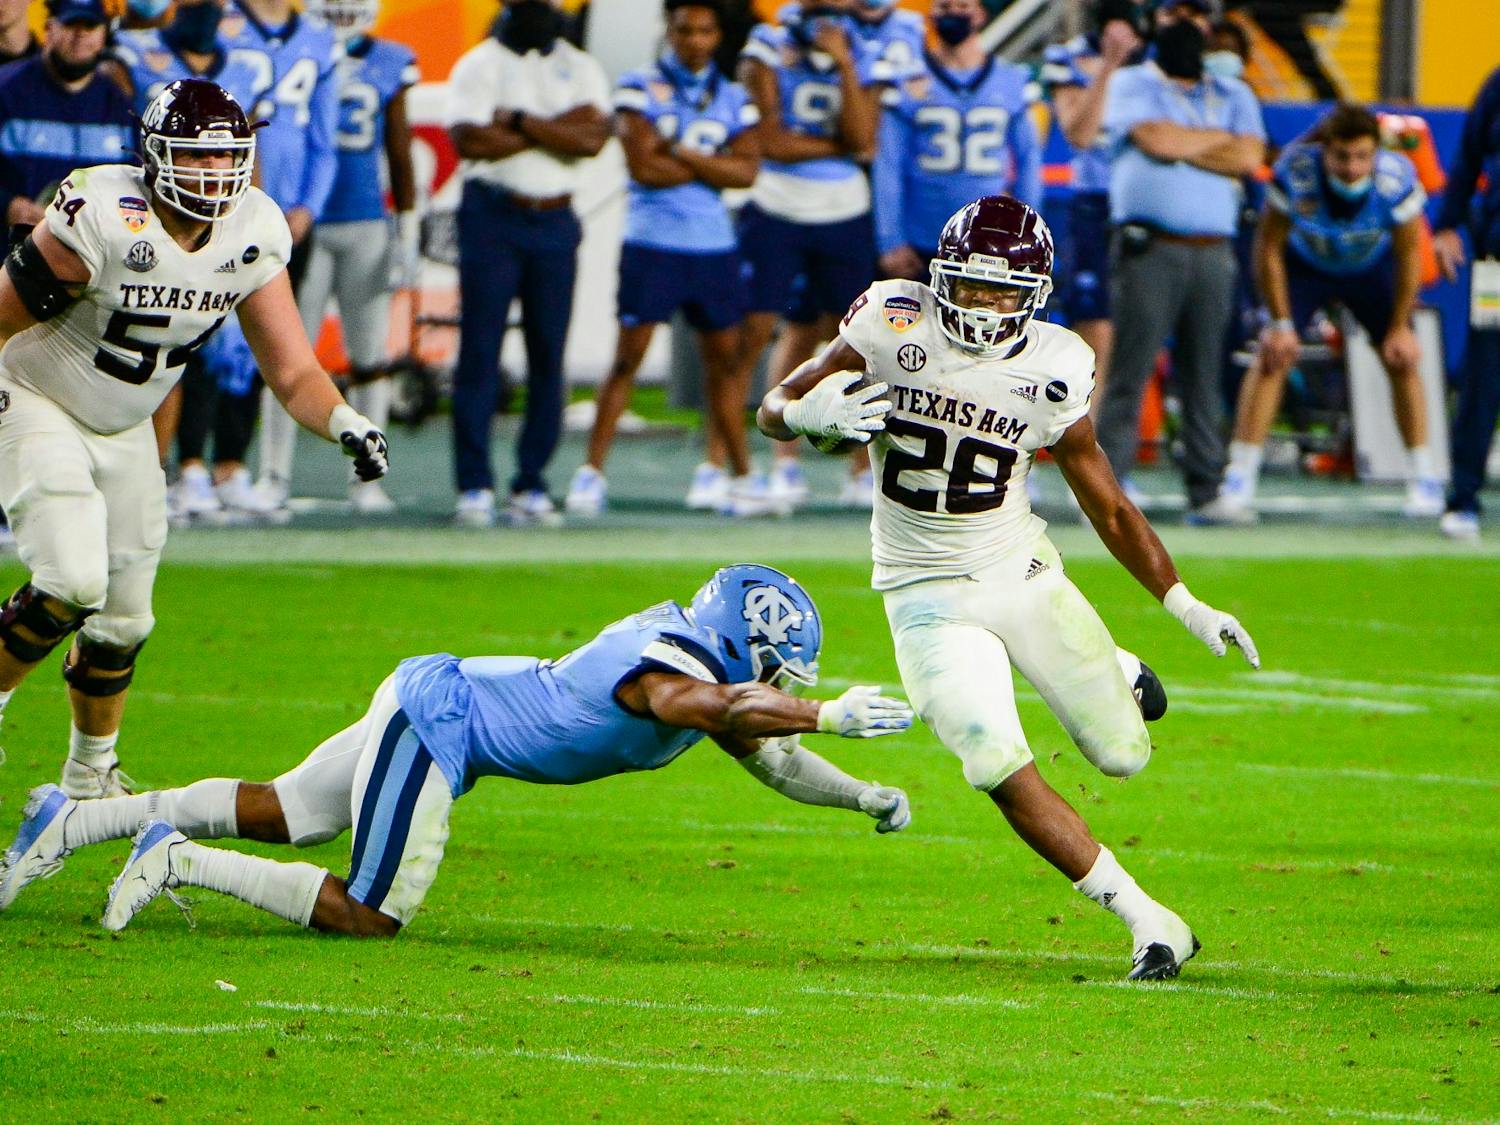 Texas A&M's sophomore running back Isaiah Spiller (28) evades UNC's junior defensive back Trey Morrison during the Capitol One Orange Bowl in Hard Rock Stadium in Miami on Saturday, Jan. 2, 2021.  Texas A&M beat UNC 41-27.